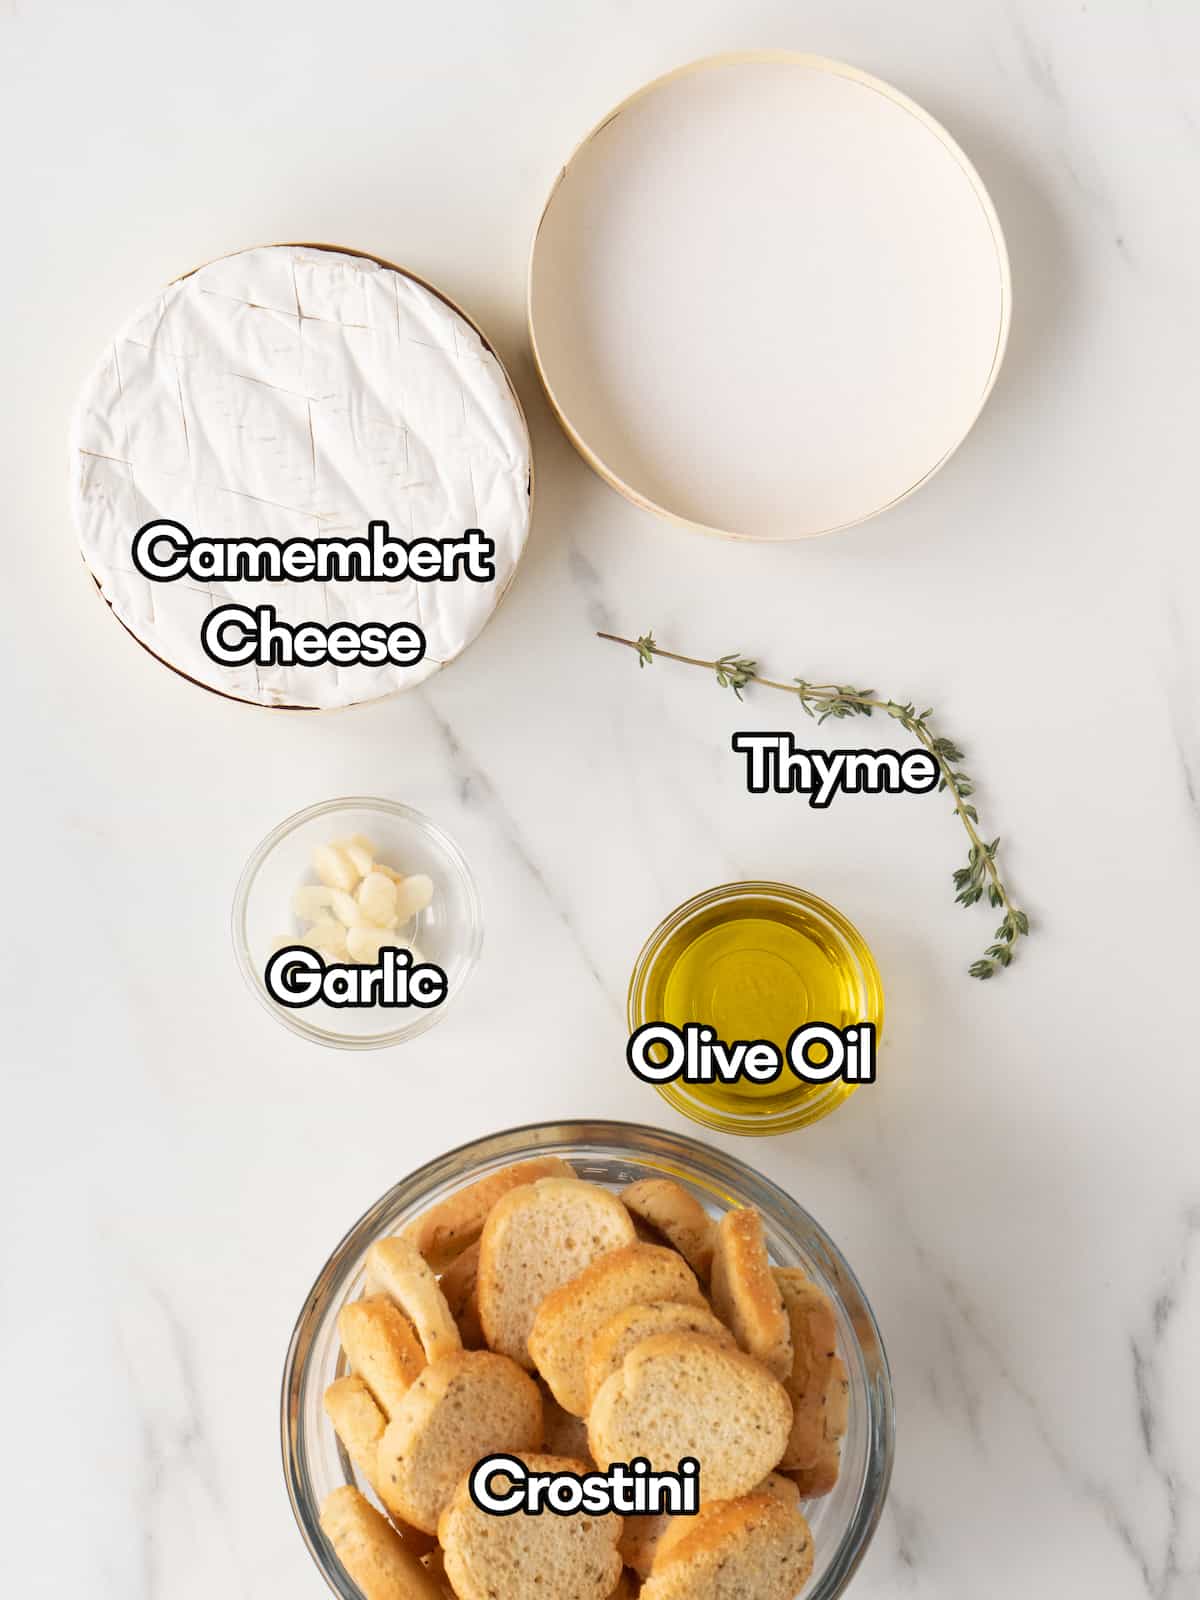 Mise-en-place with all the ingredients required to make Baked Camembert.